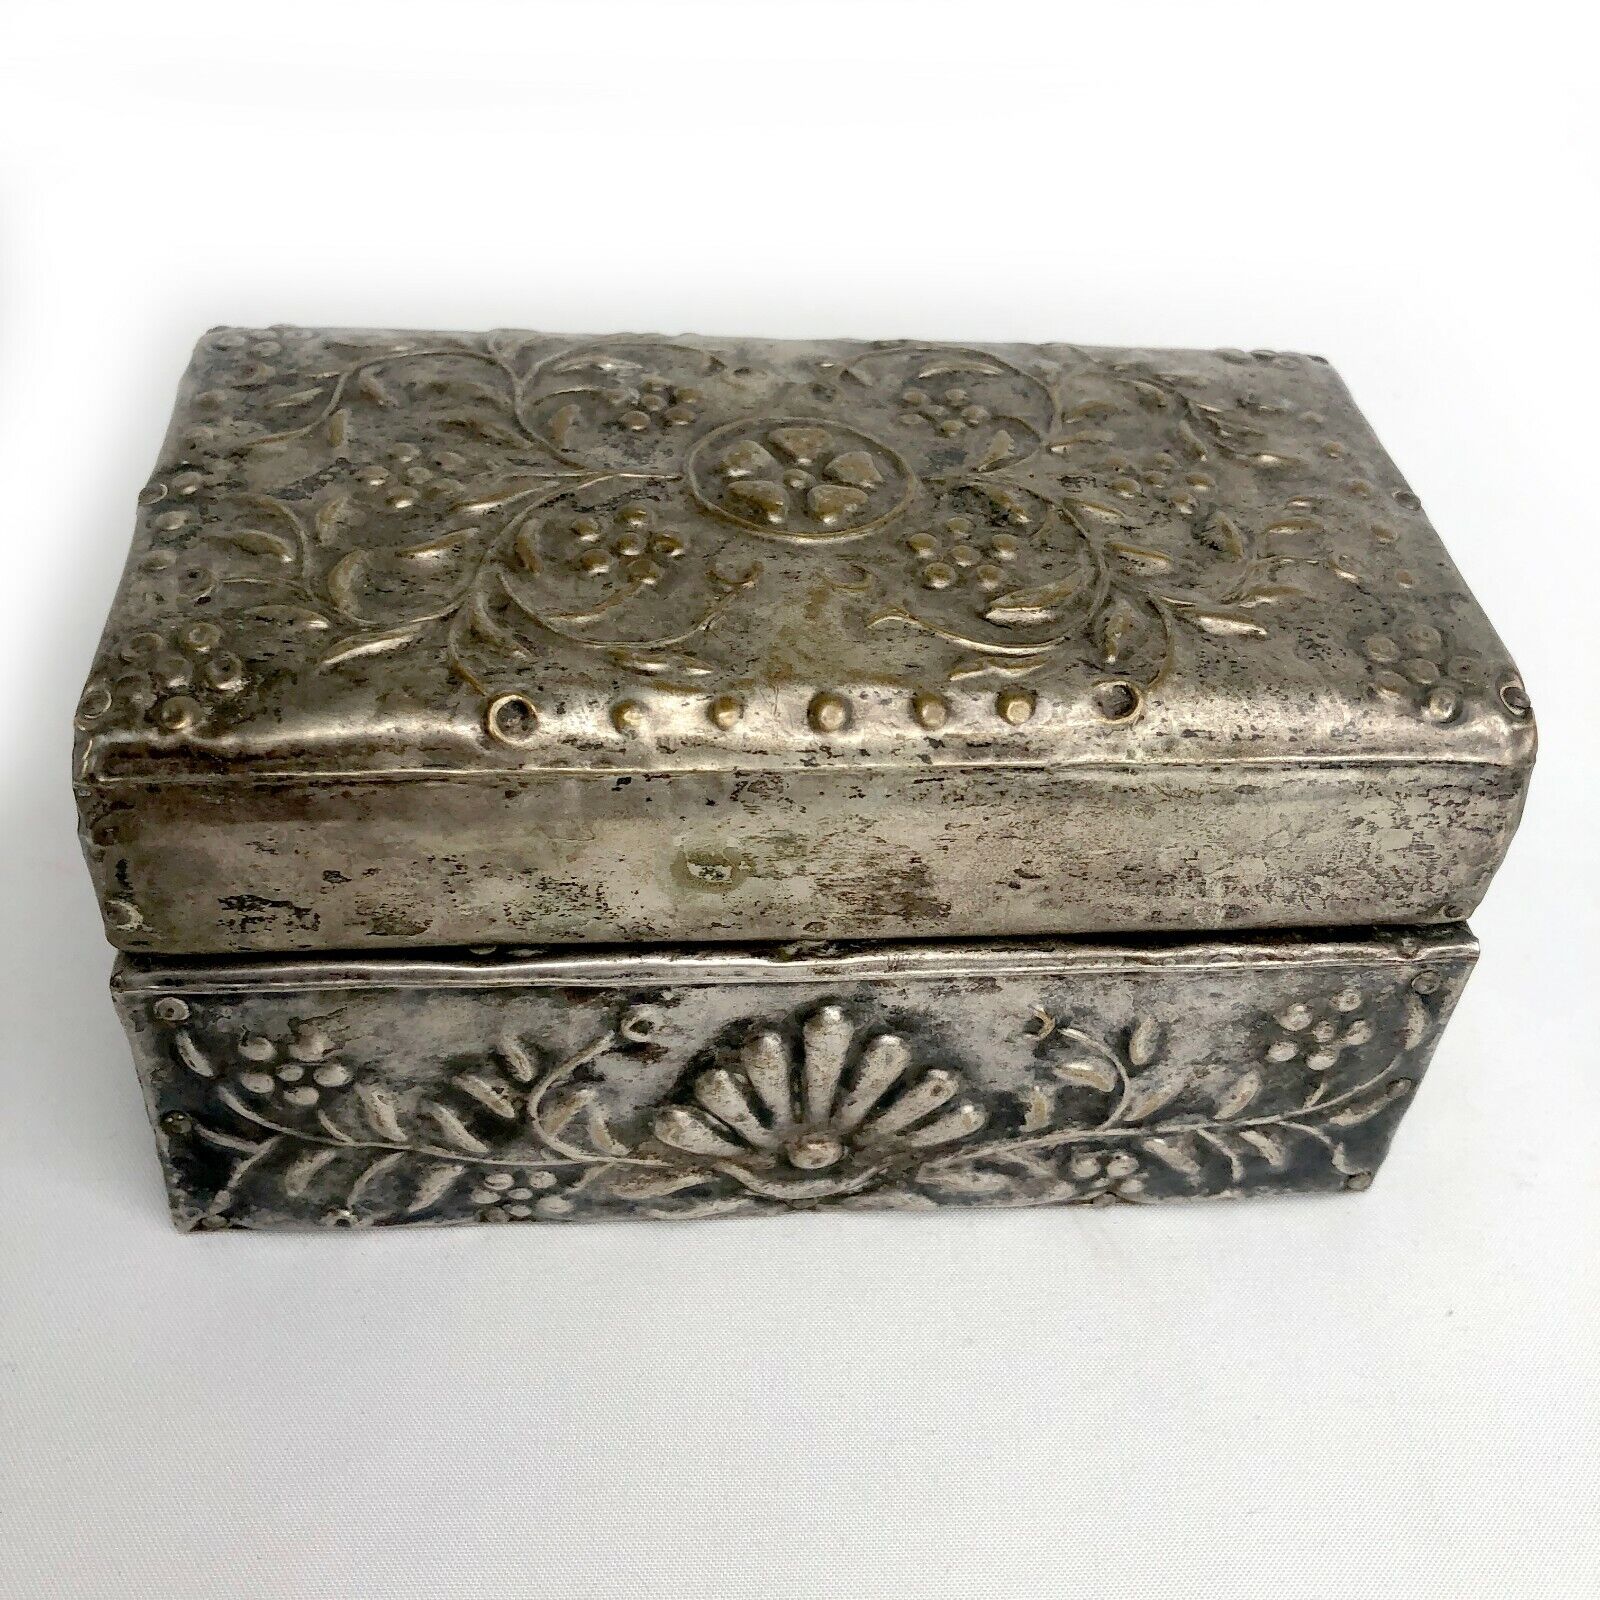 Vintage Hand Wrought Repousse Box Silver Crafted Wood Overlay Floral Design